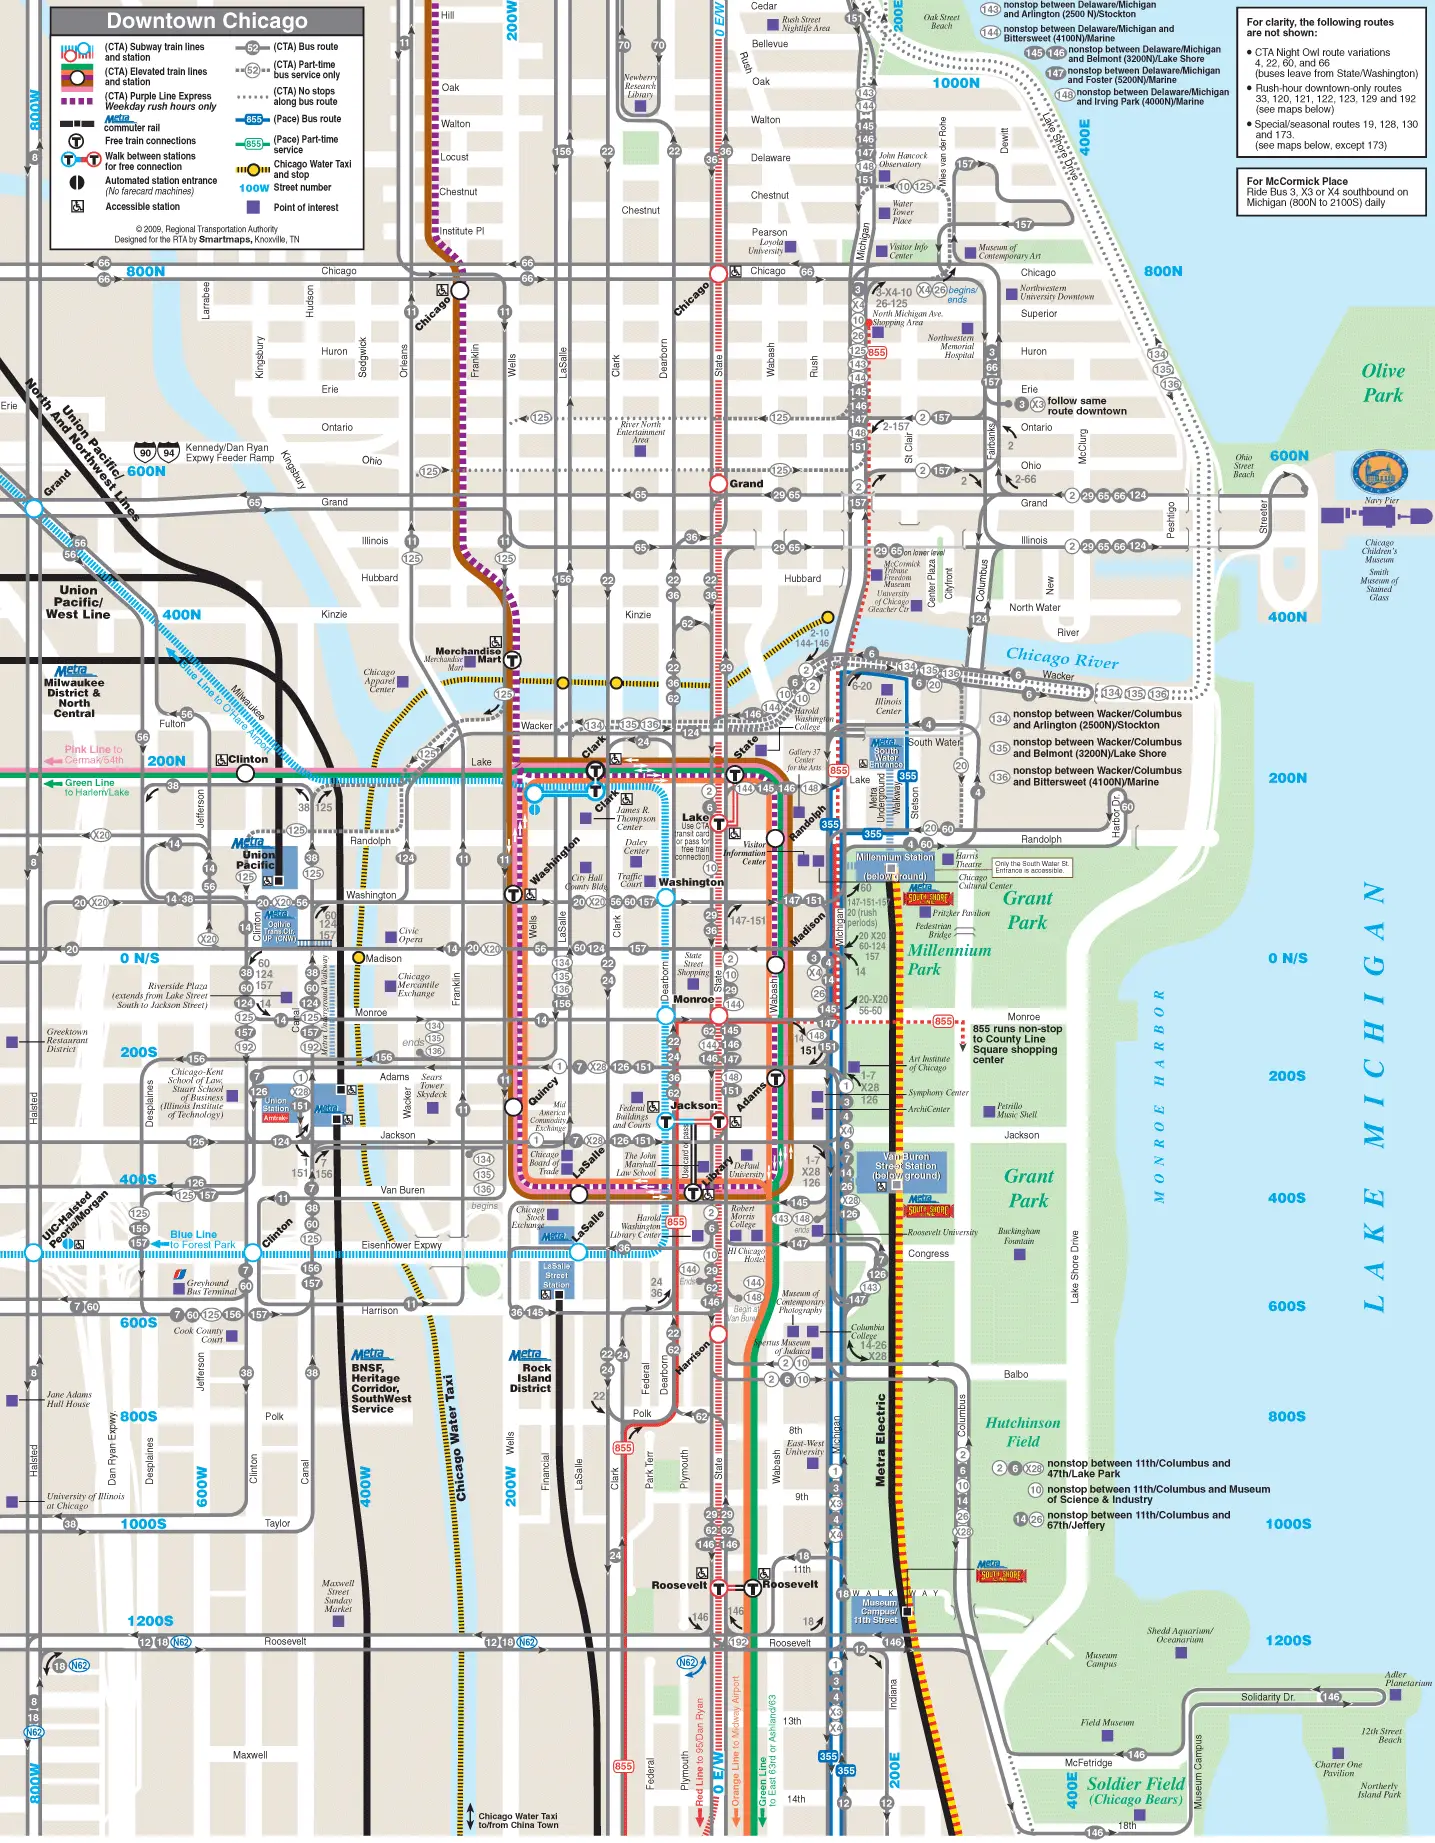 Chicago Downtown Transport Map